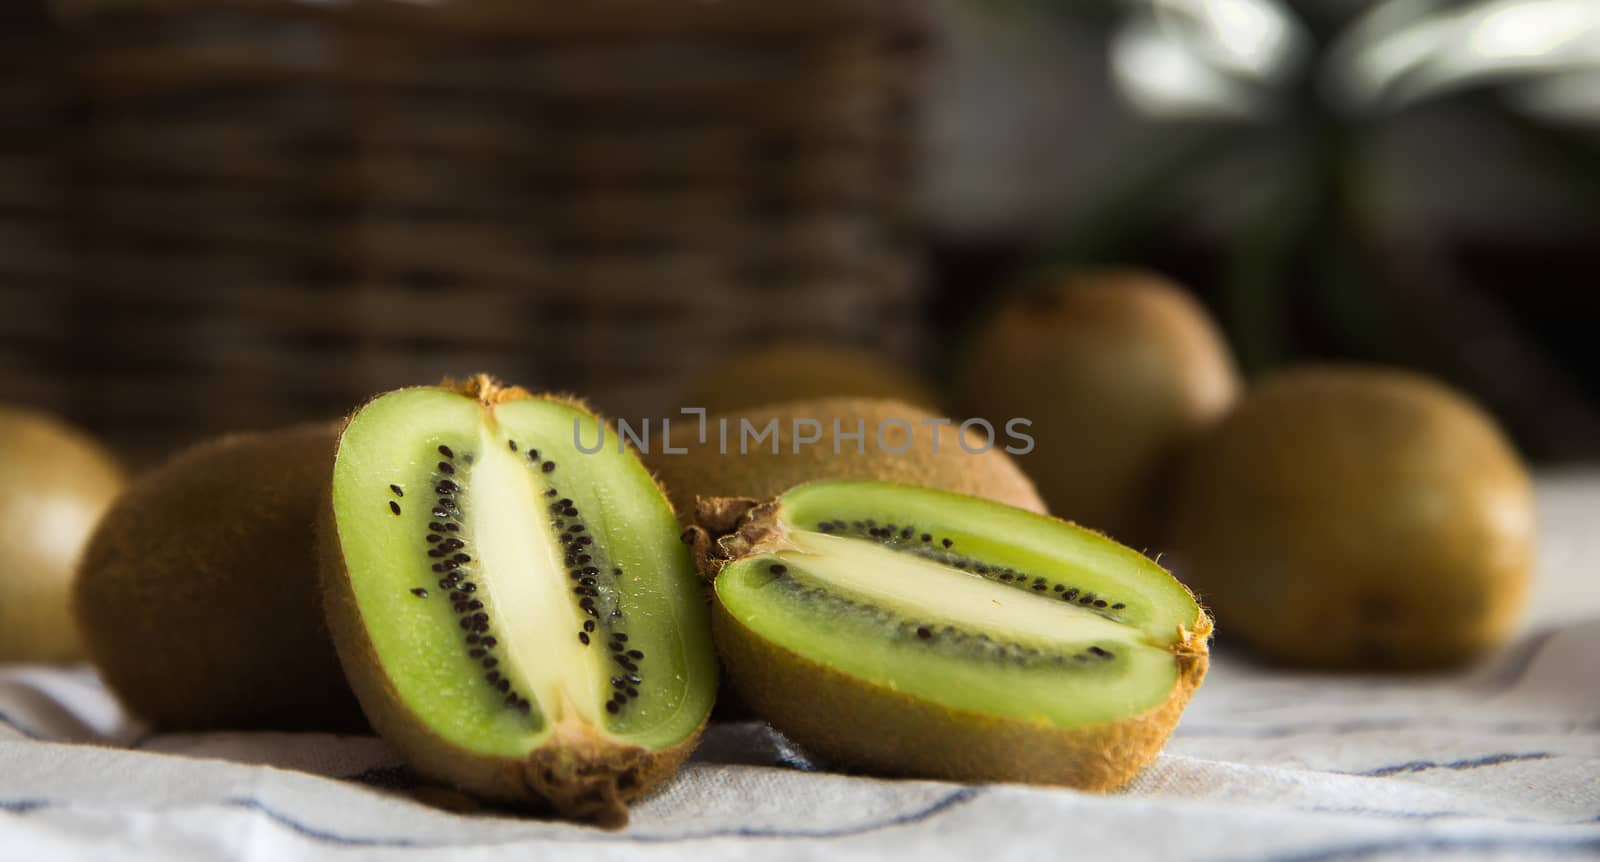 Close-up of a group of kiwis, one of them cut in half. Dark background with a wicker basket. On a white tablecloth with blue lines.